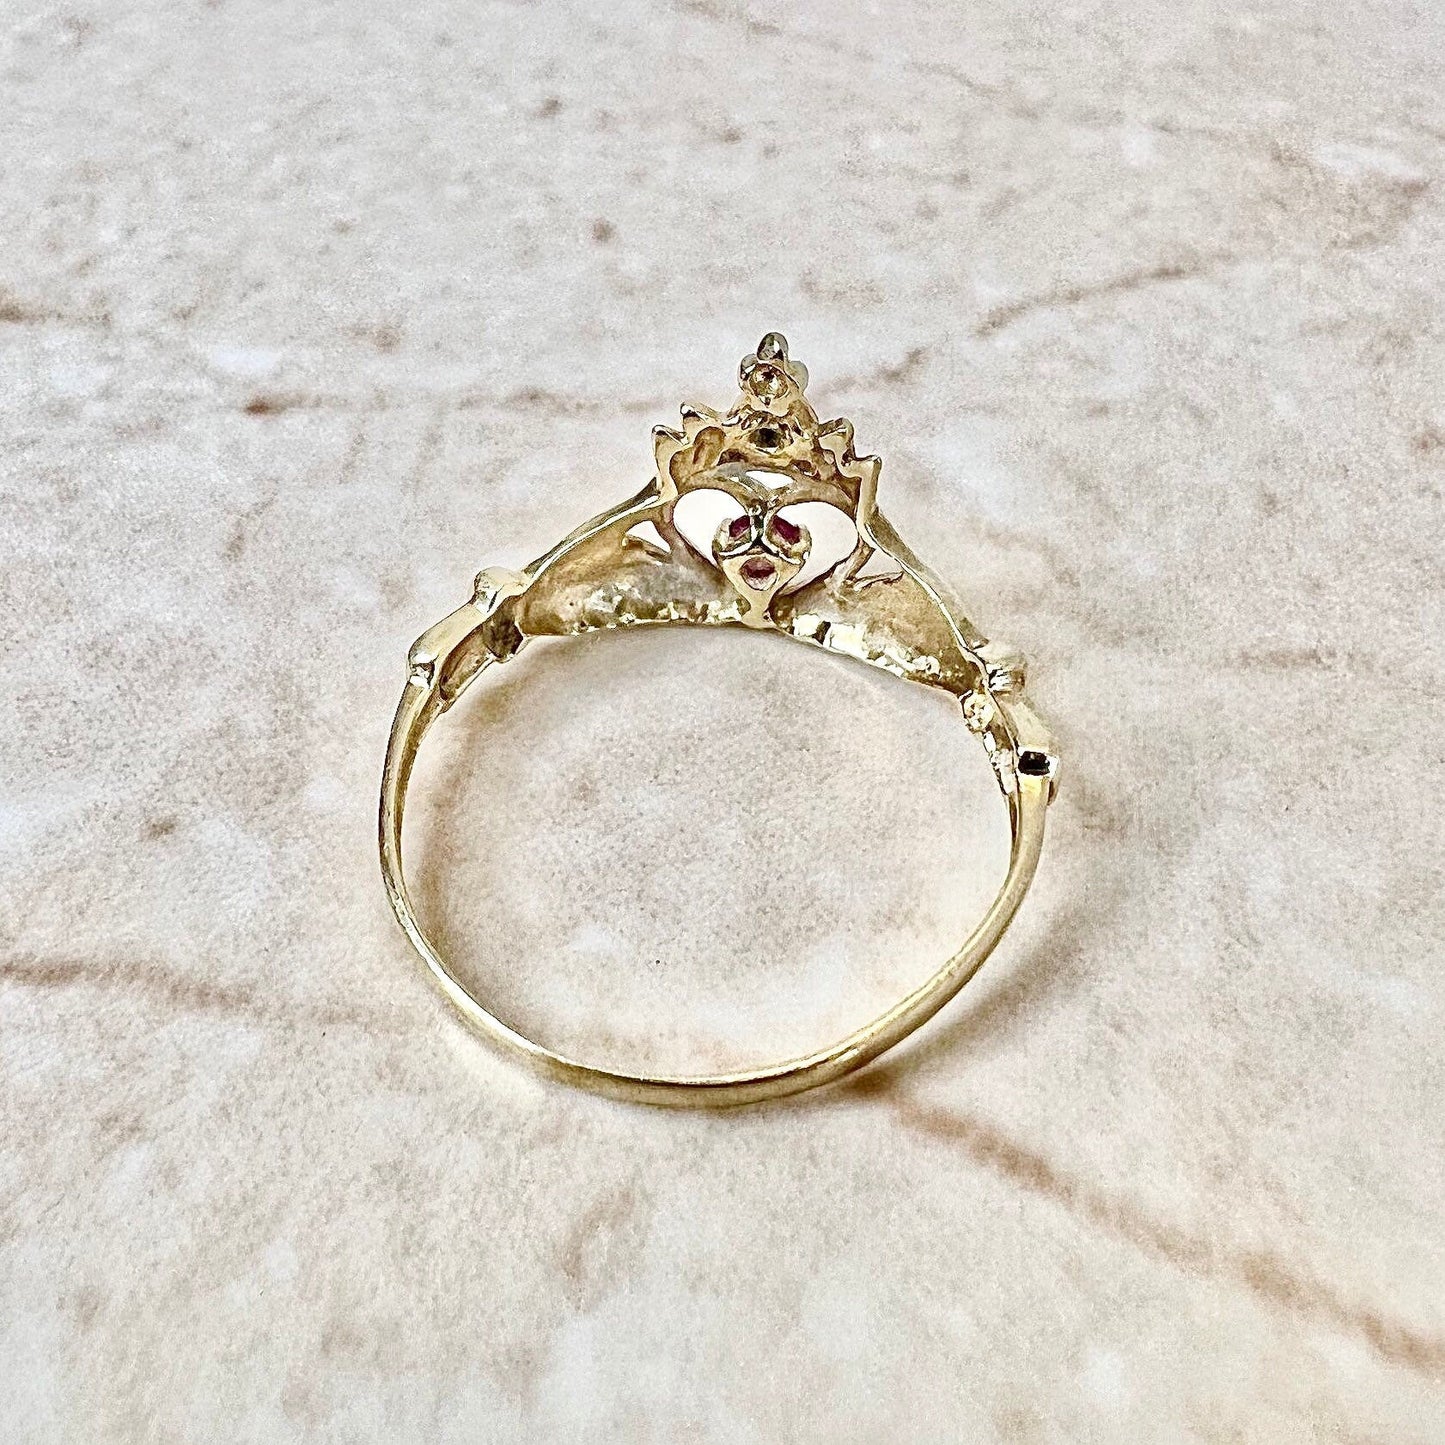 Vintage 10K Ruby Claddagh Ring - Promise Ring - Wedding Ring - Friendship Ring - Engagement ring - May Birthstone - Best Gift For Her